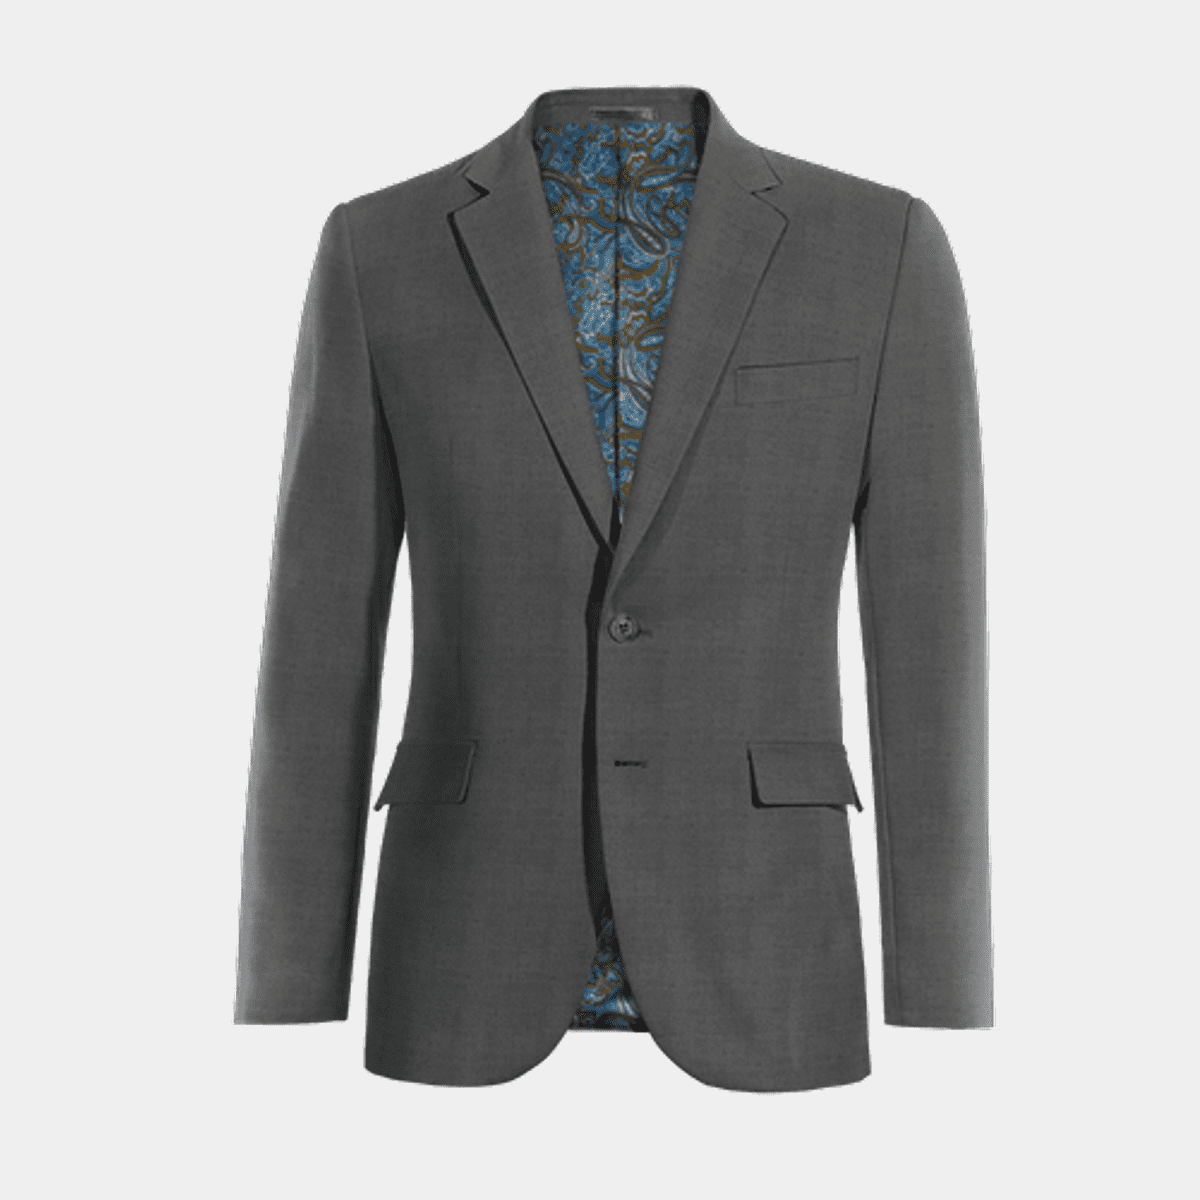 Iron grey super 100s Pure wool year-round Suit Jacket